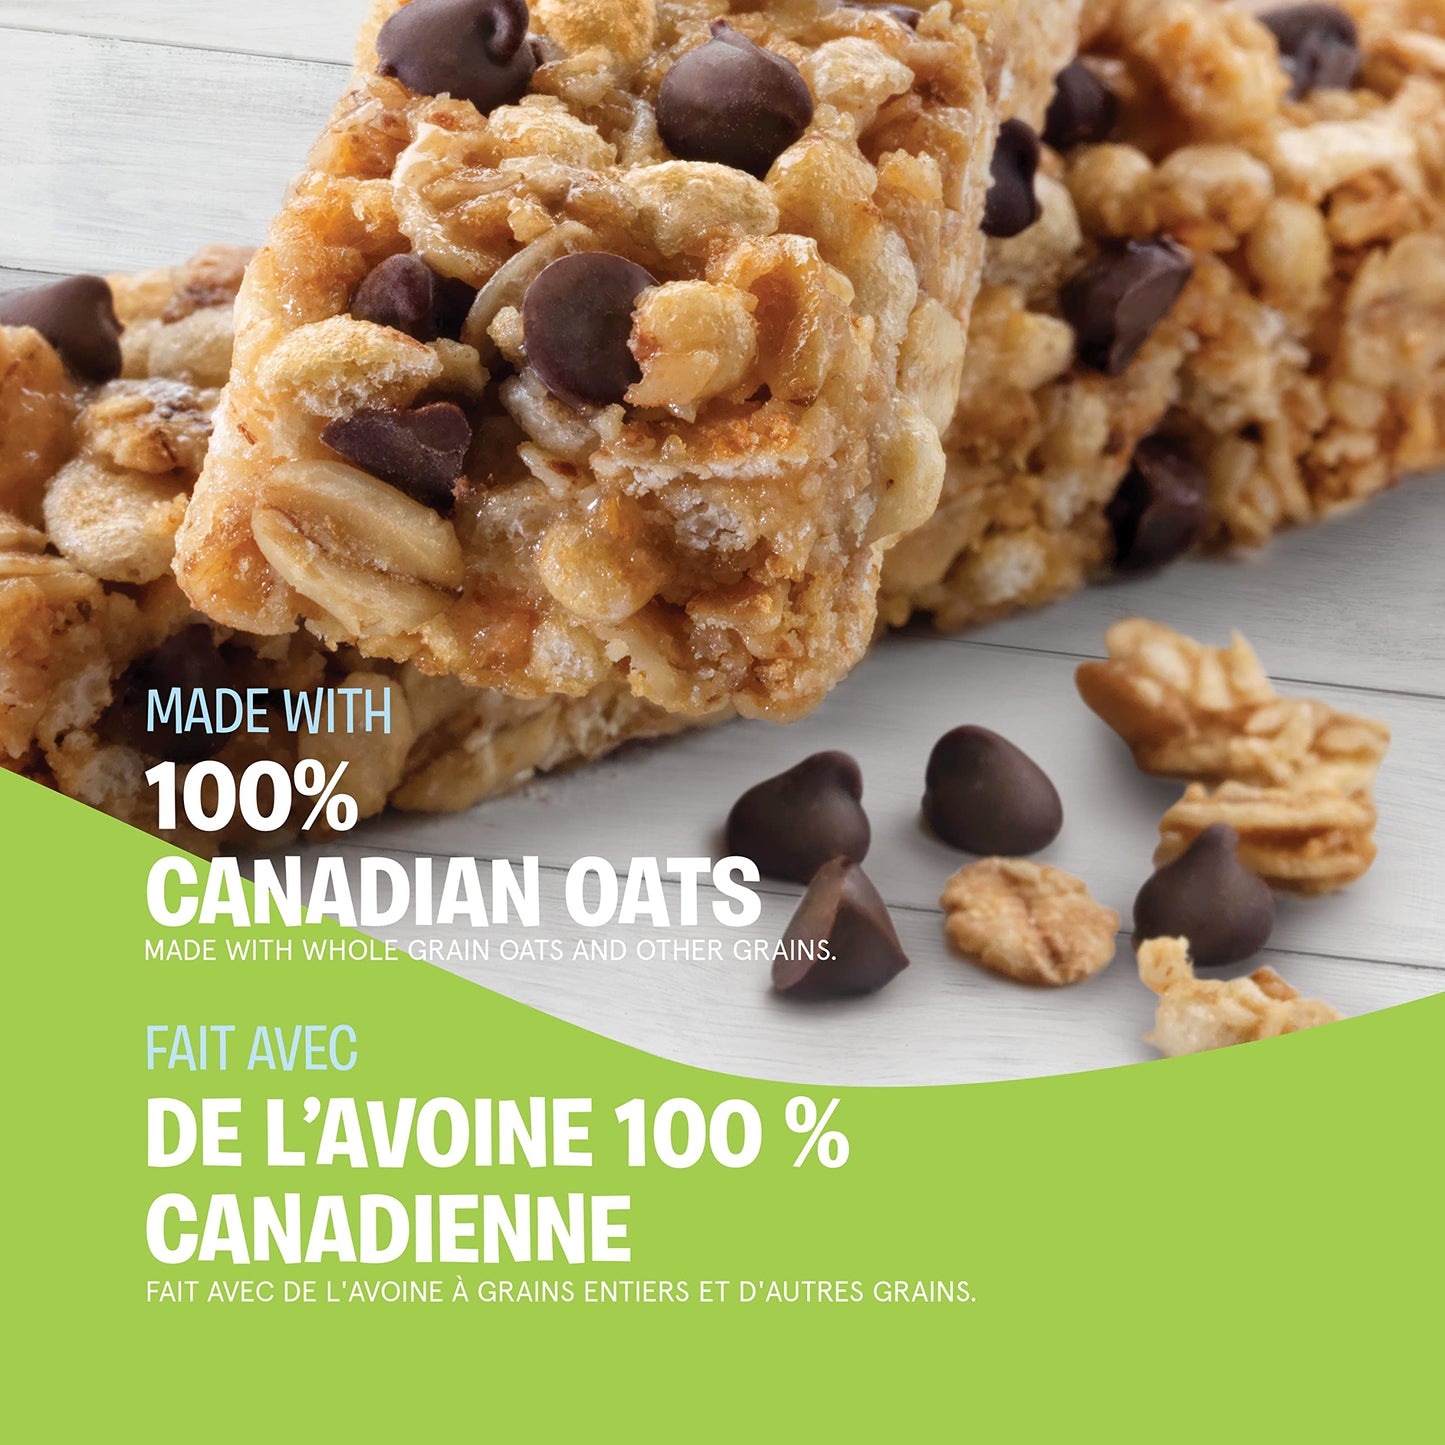 Quaker Chewy Chocolate Chip Granola Bars 40 Bars Value Pack, 960g/33.9oz (Shipped from Canada)